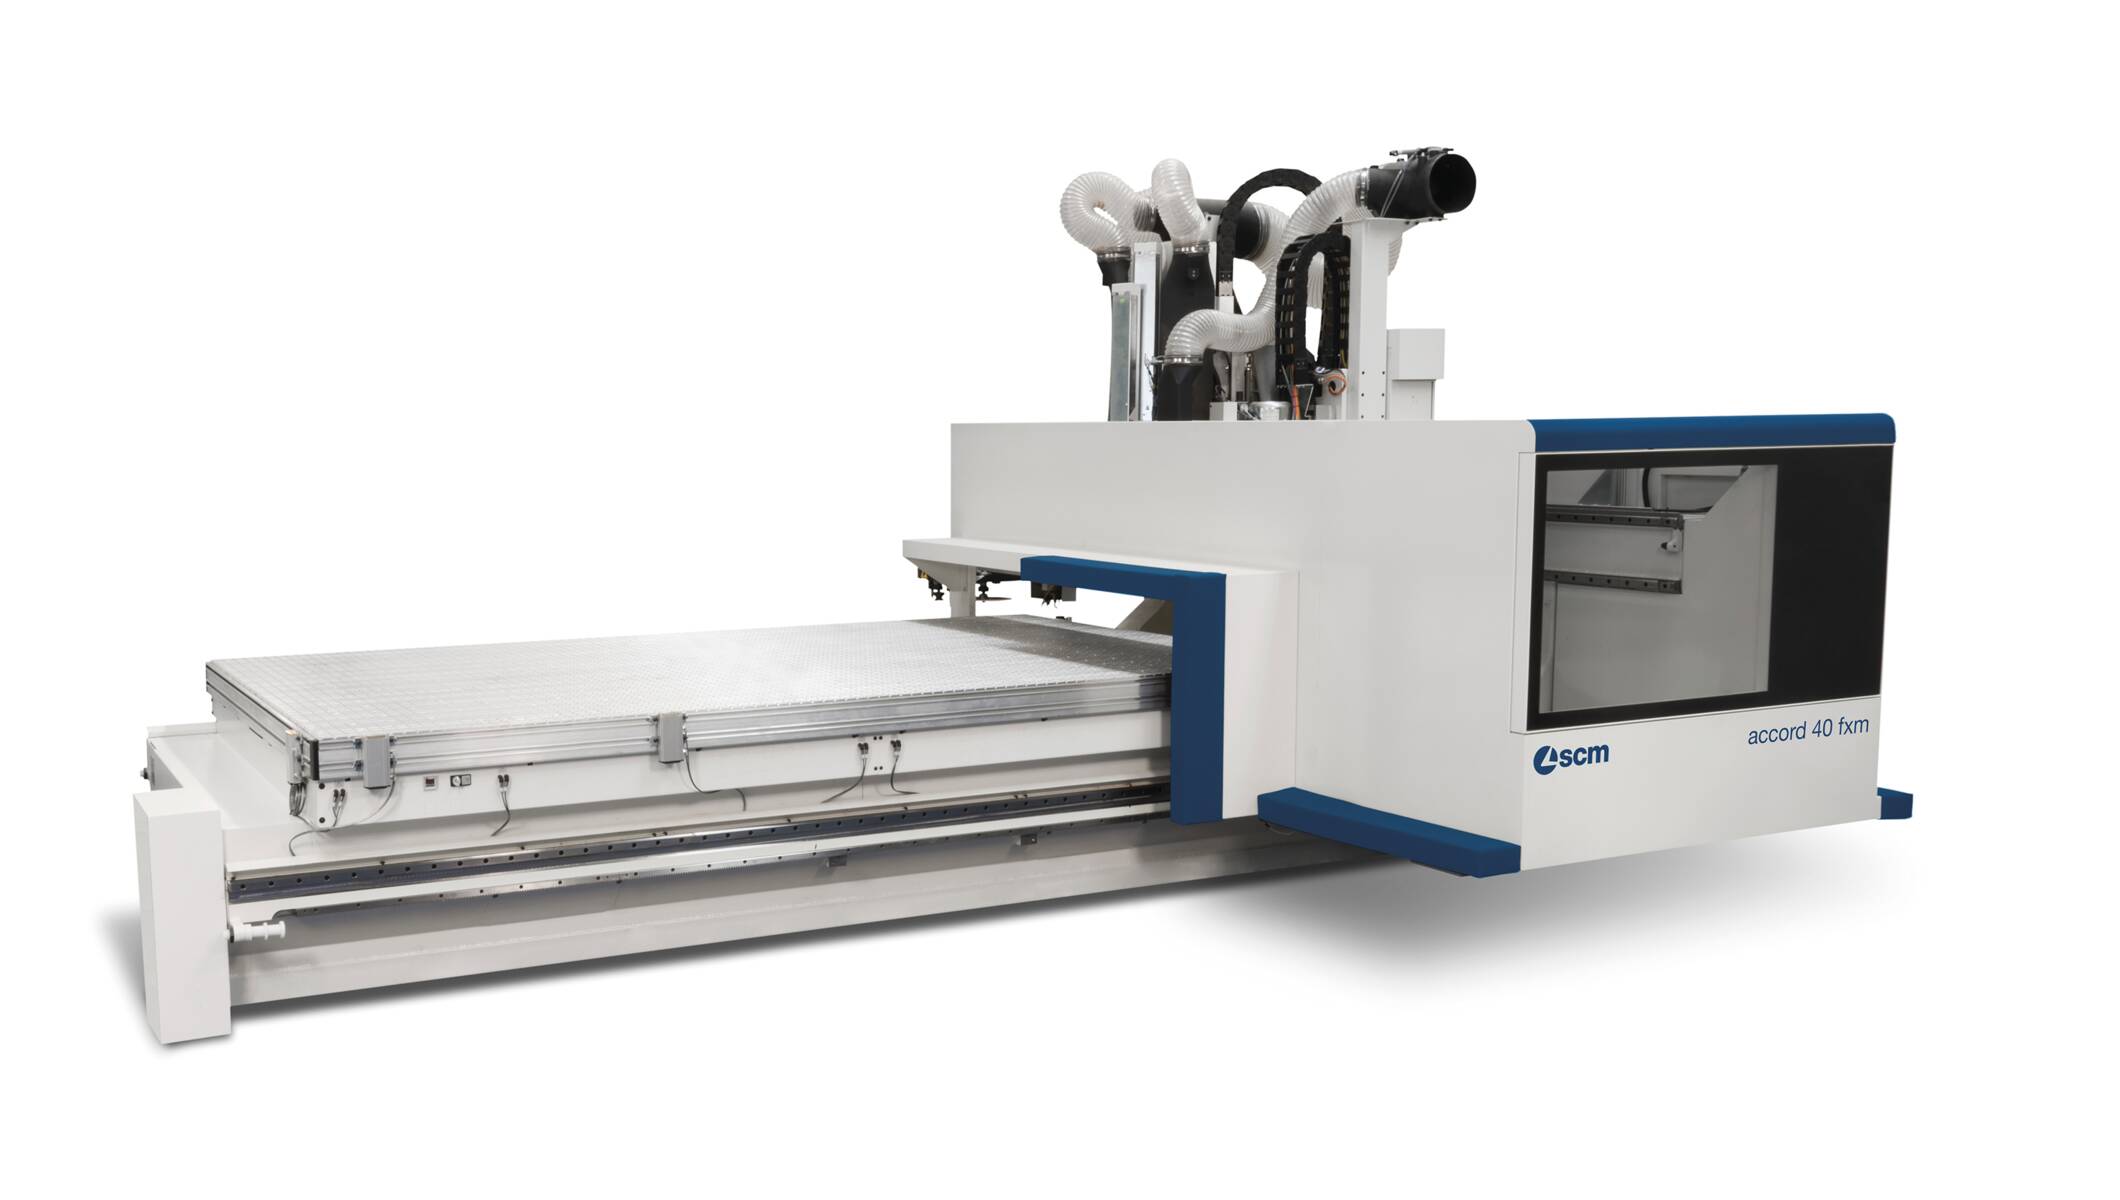 CNC Machining Centres - CNC Nesting Machining Centres for routing and drilling - accord 40 fxm